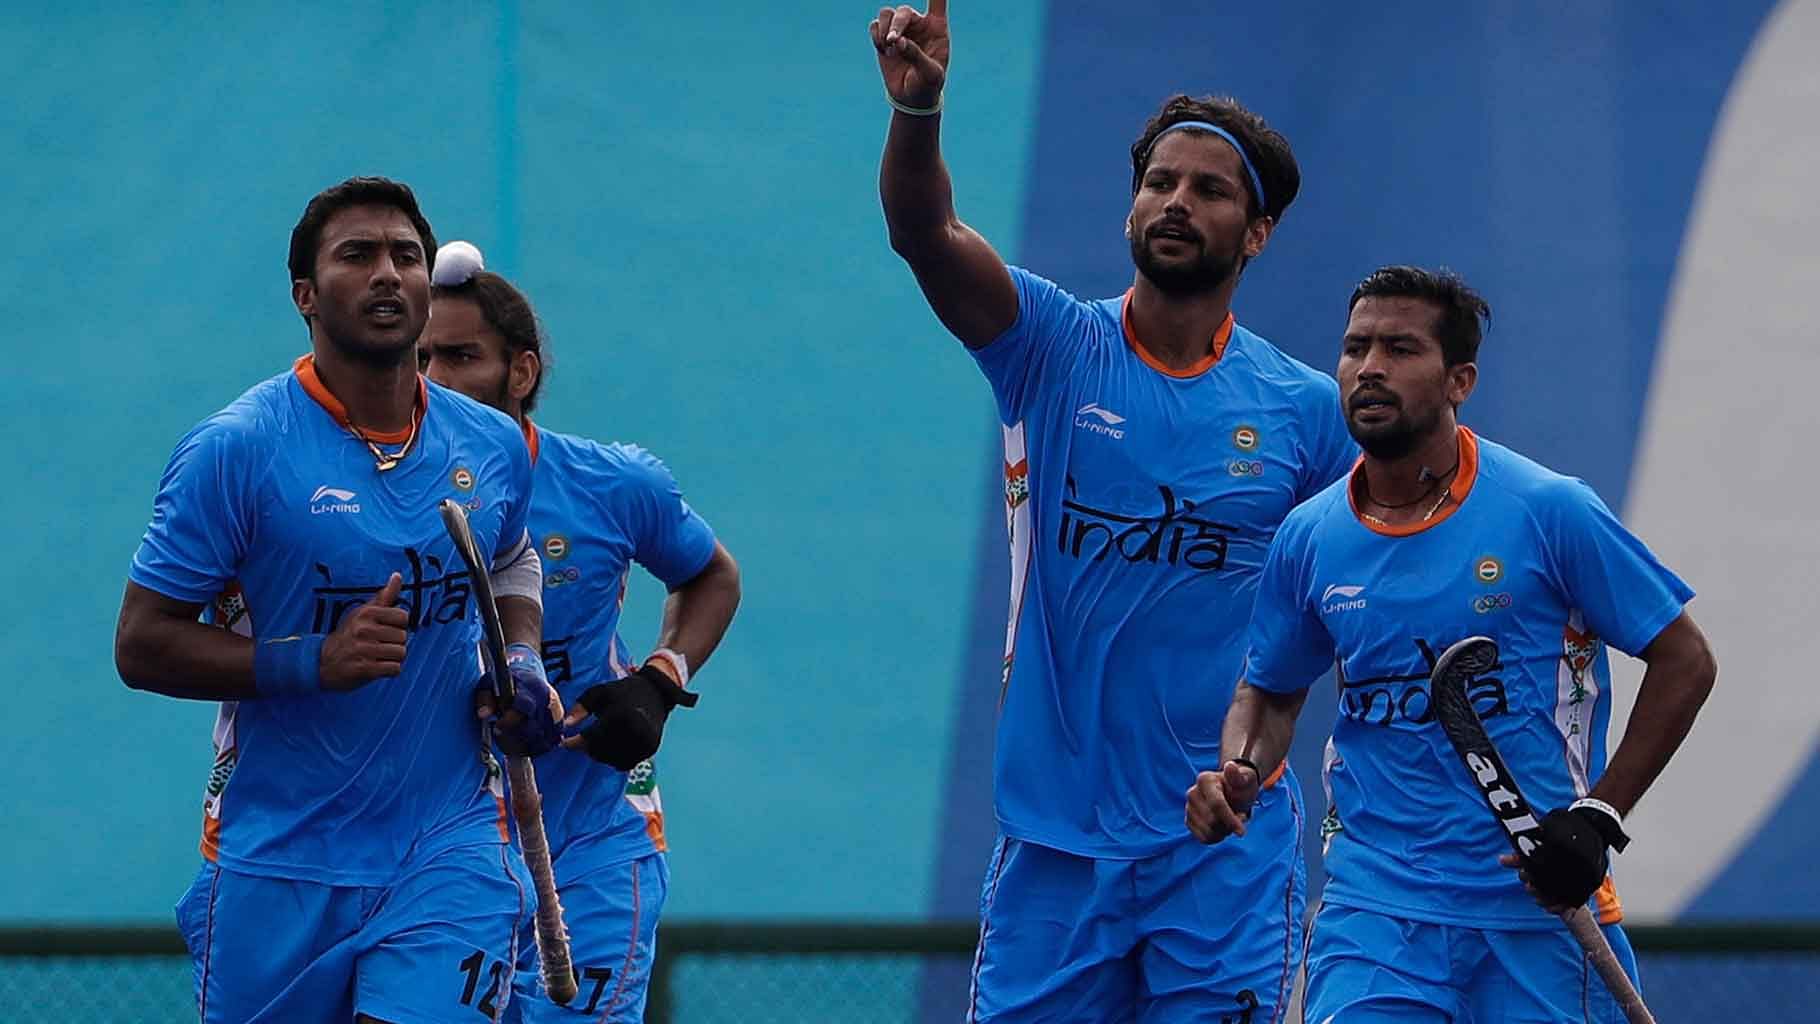 India’s Rupinder Pal Singh, center, celebrates his goal against Germany at the Rio Olympics. (Photo: AP)&nbsp;